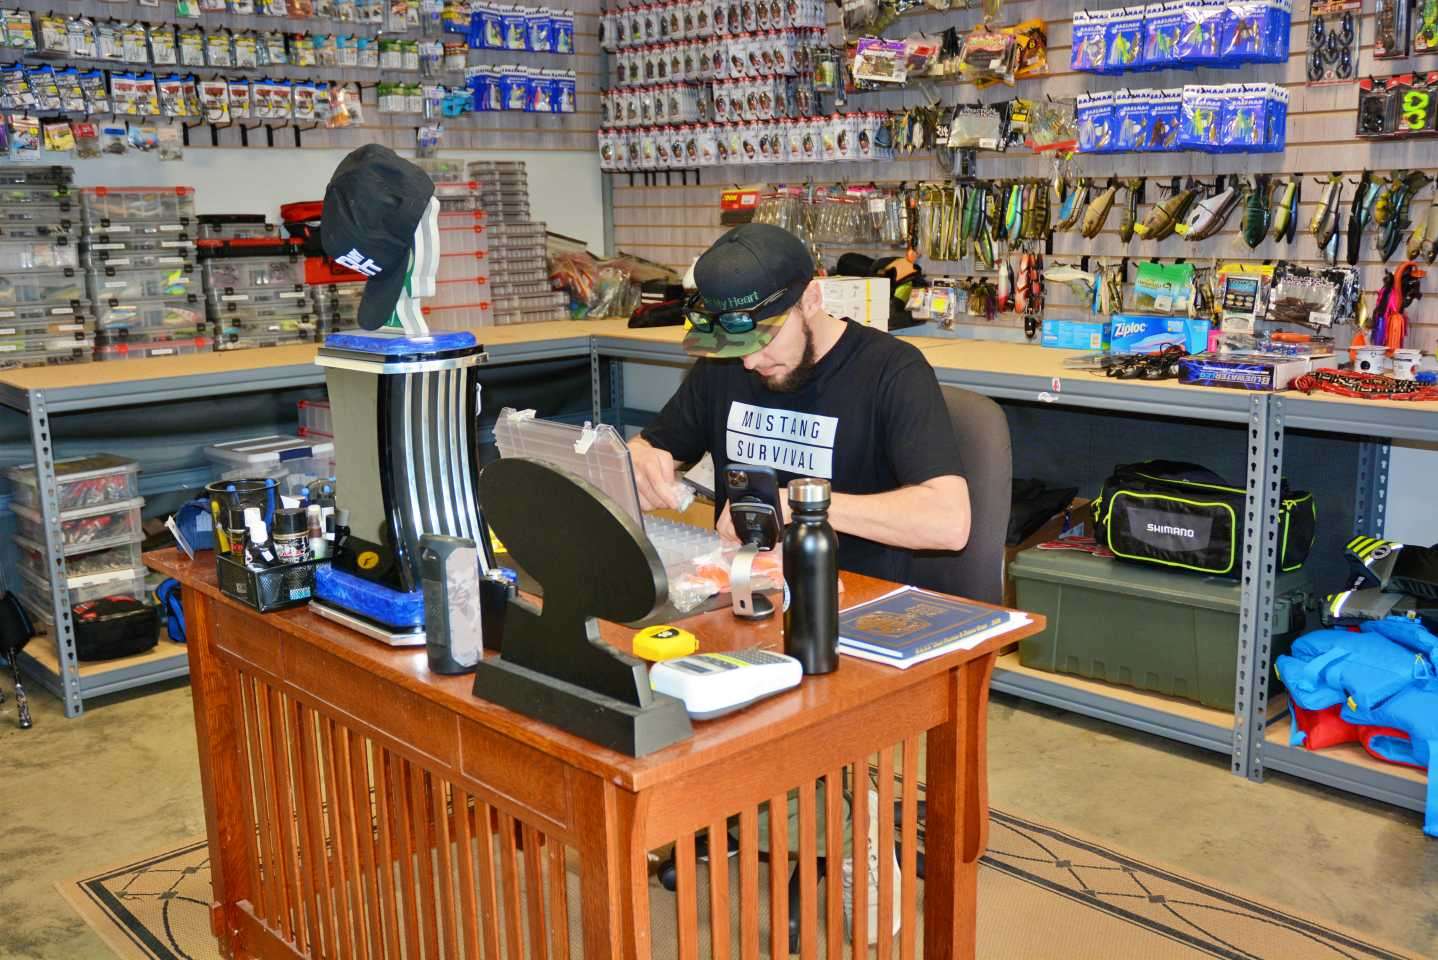 Carl is a big-time lure modifier and this desk is near everything needed to customize baits.